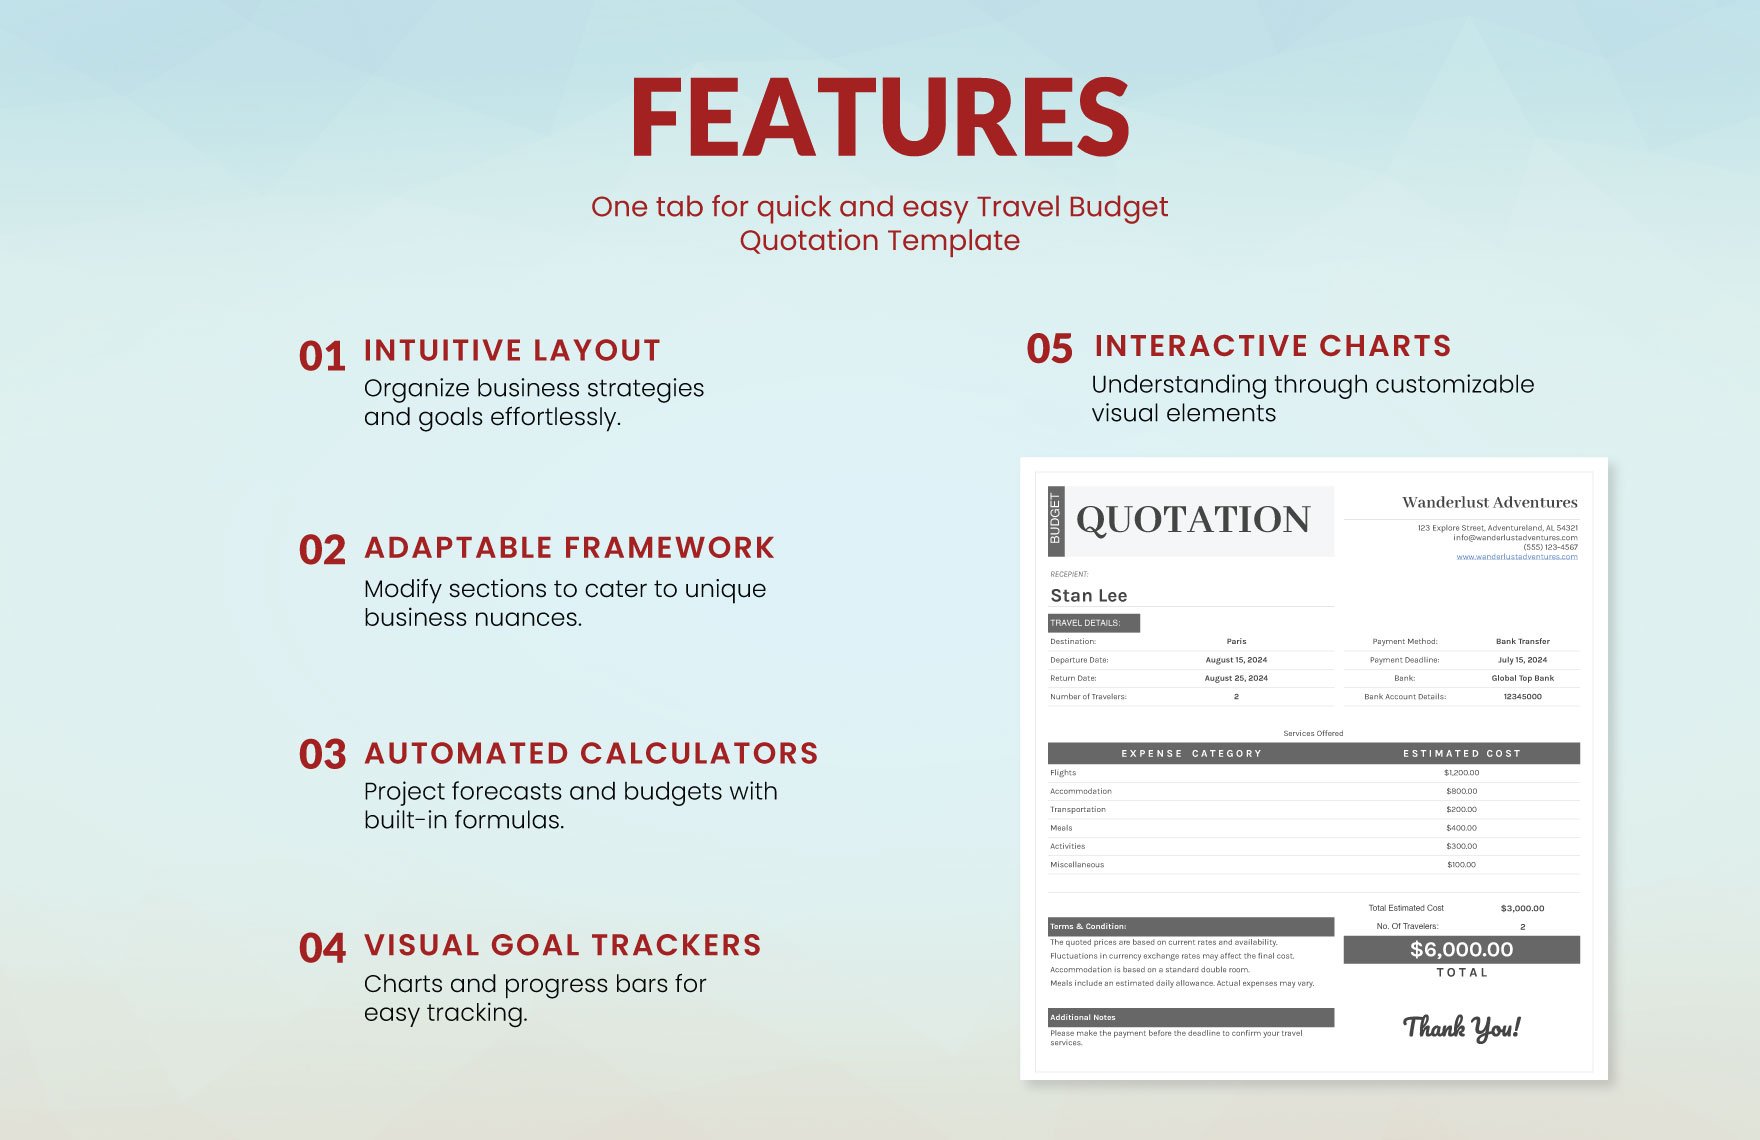 Travel Budget Quotation Template